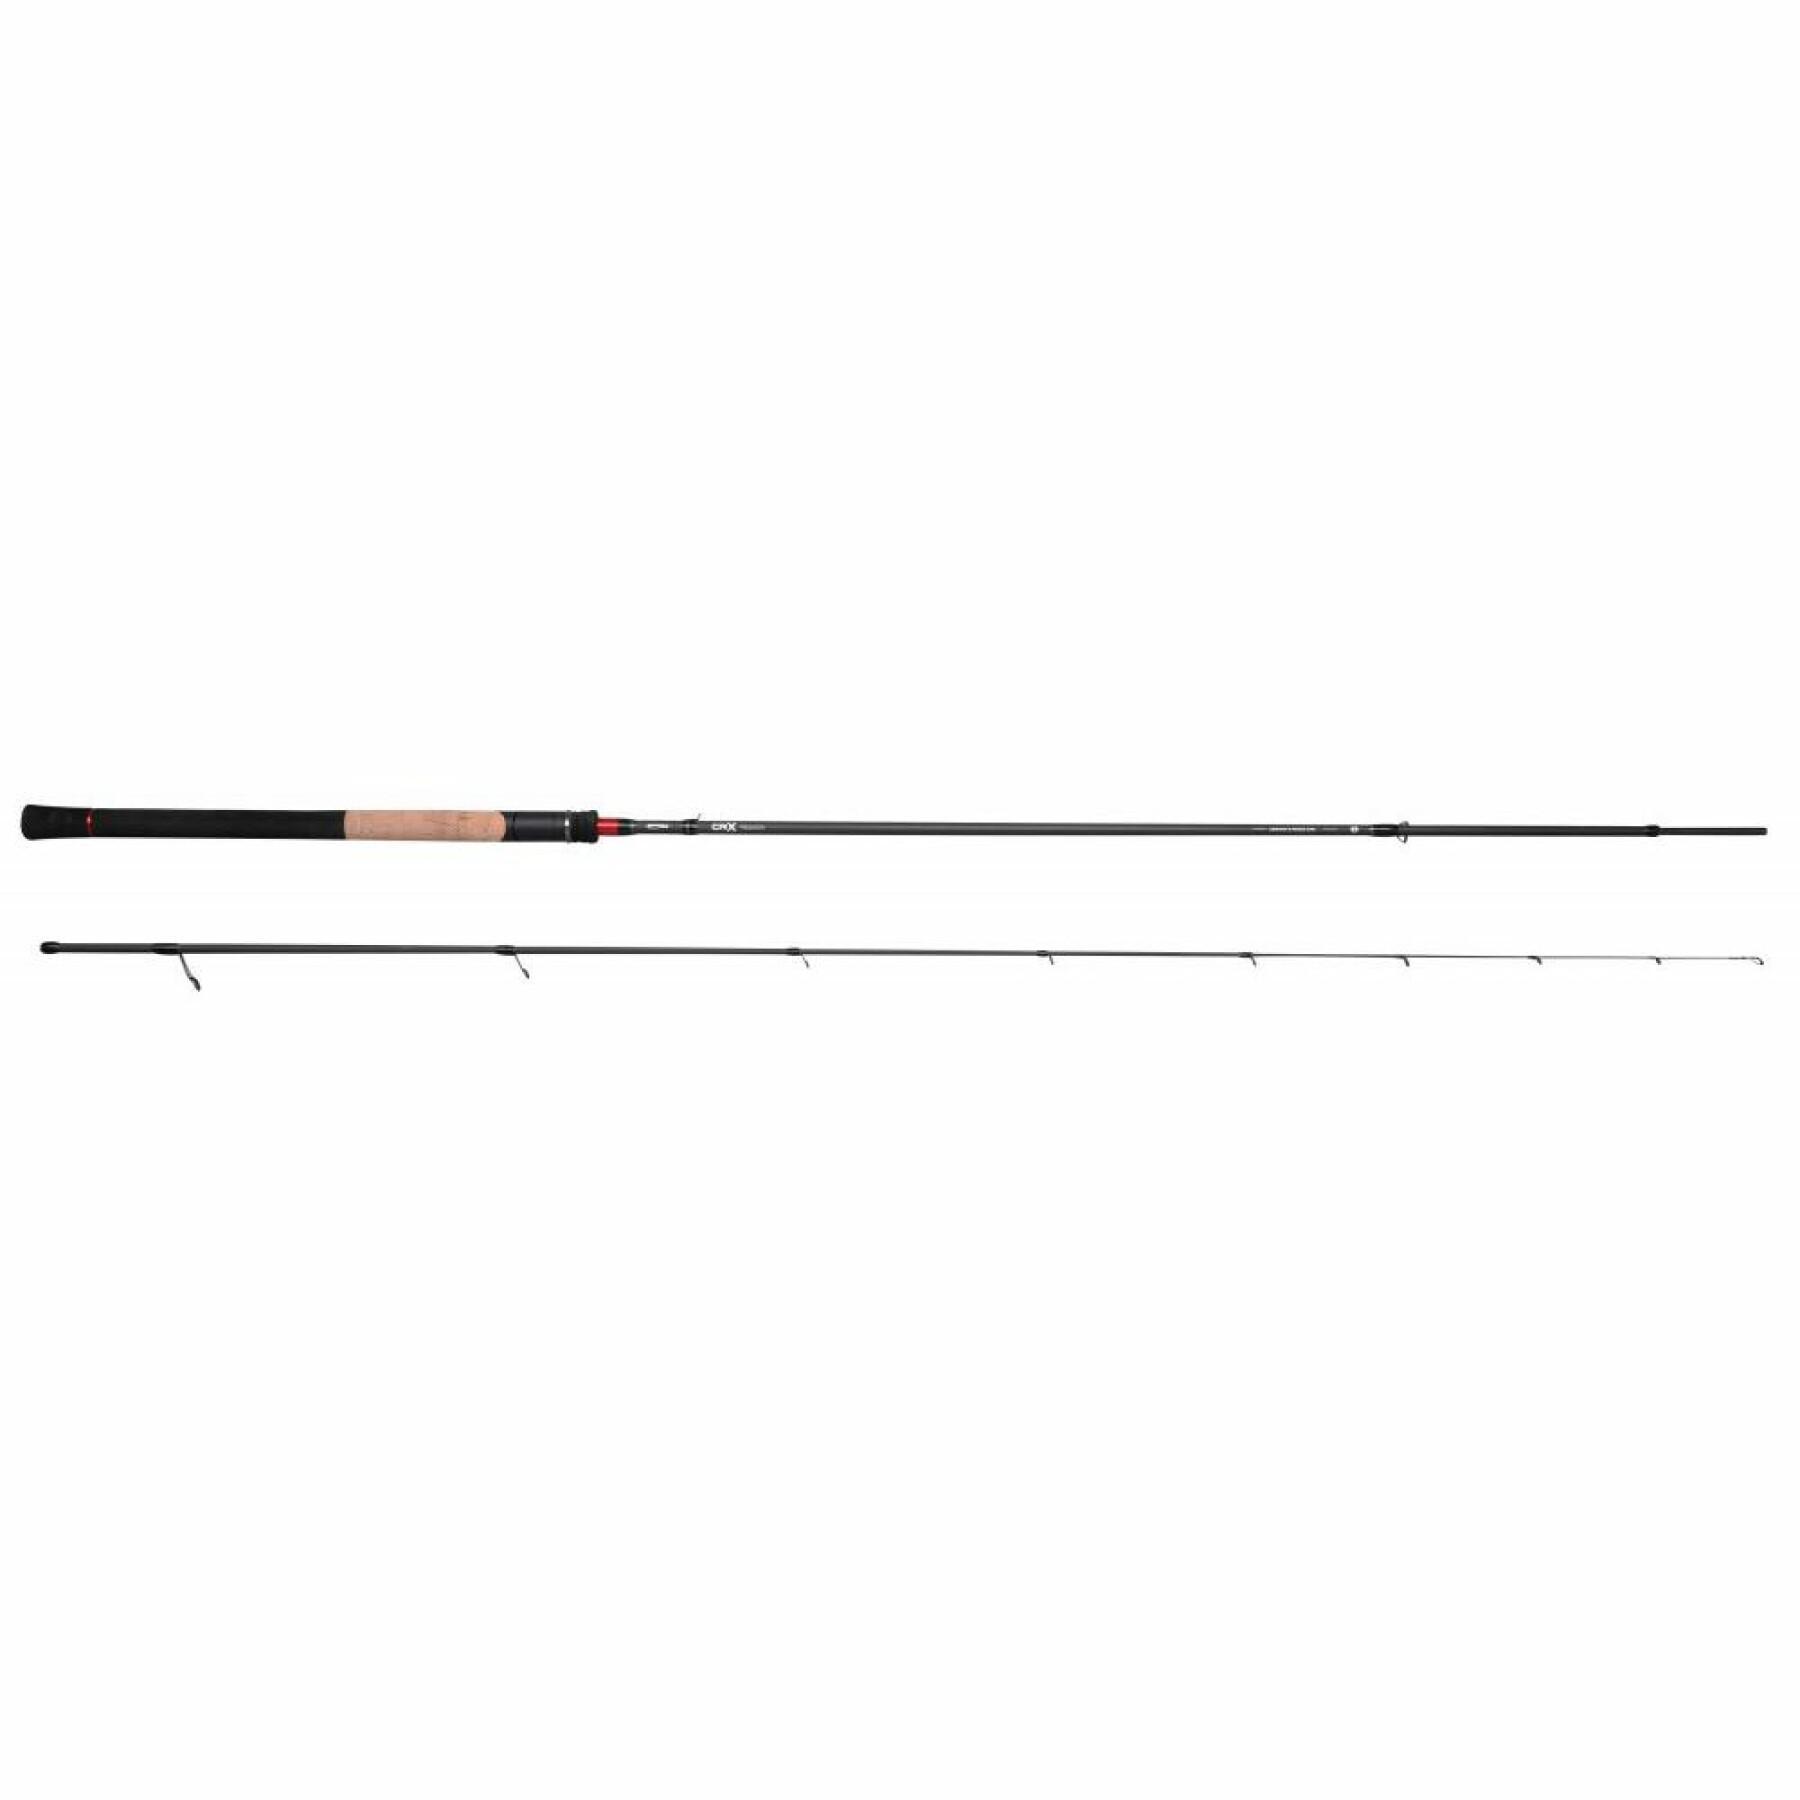 Spinning rod Spro Crx Dropshot & Finesse 3-18g